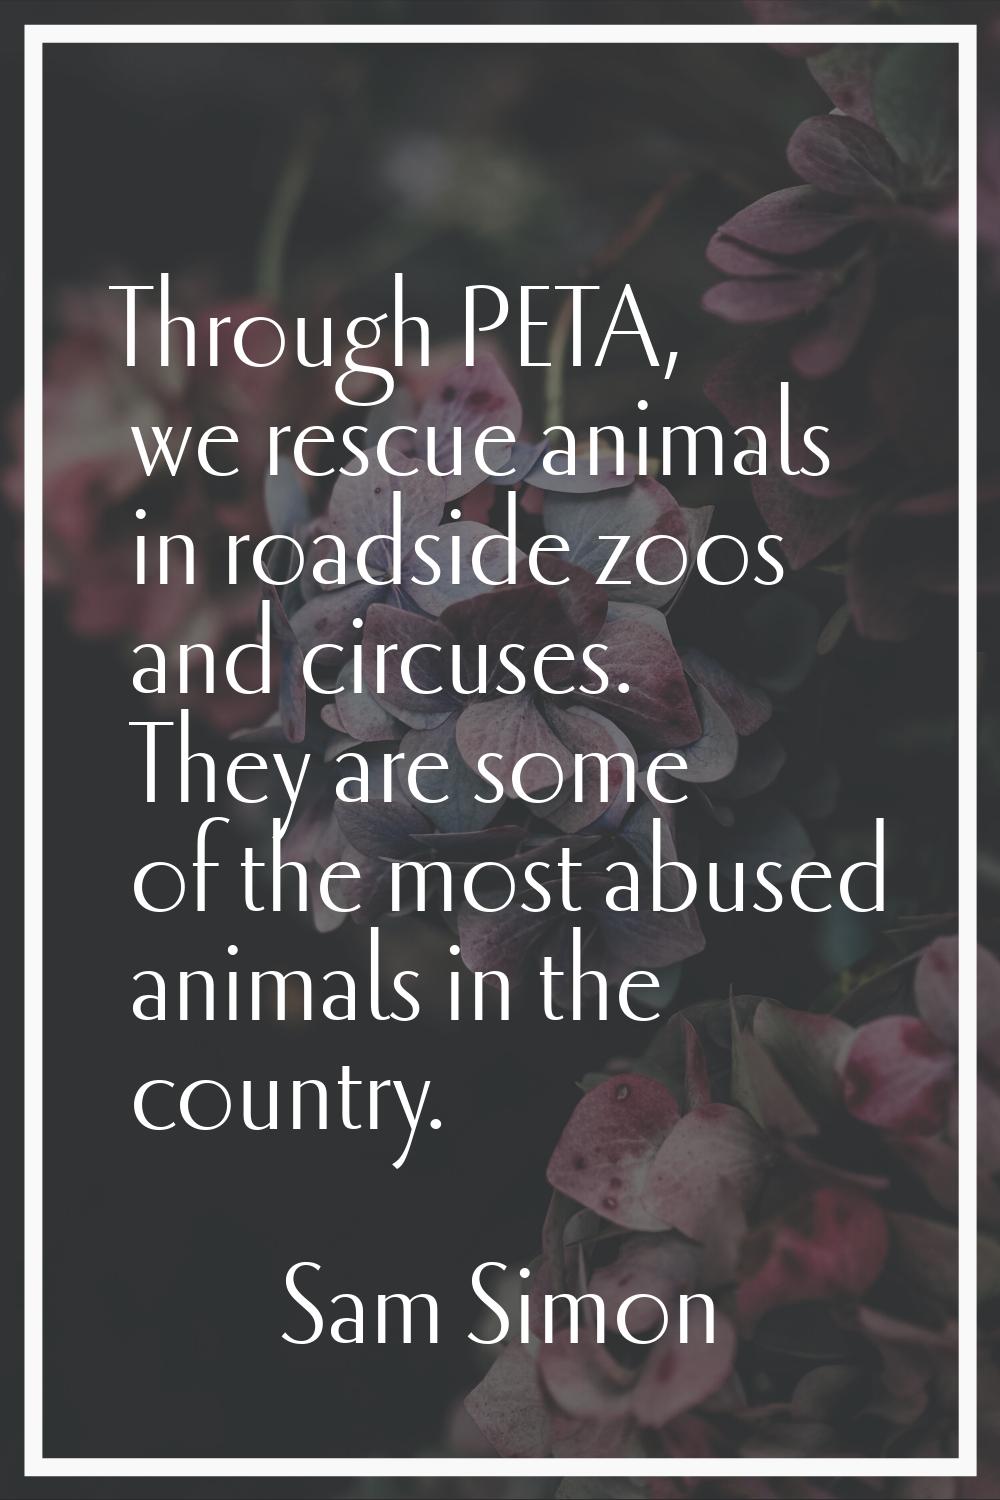 Through PETA, we rescue animals in roadside zoos and circuses. They are some of the most abused ani